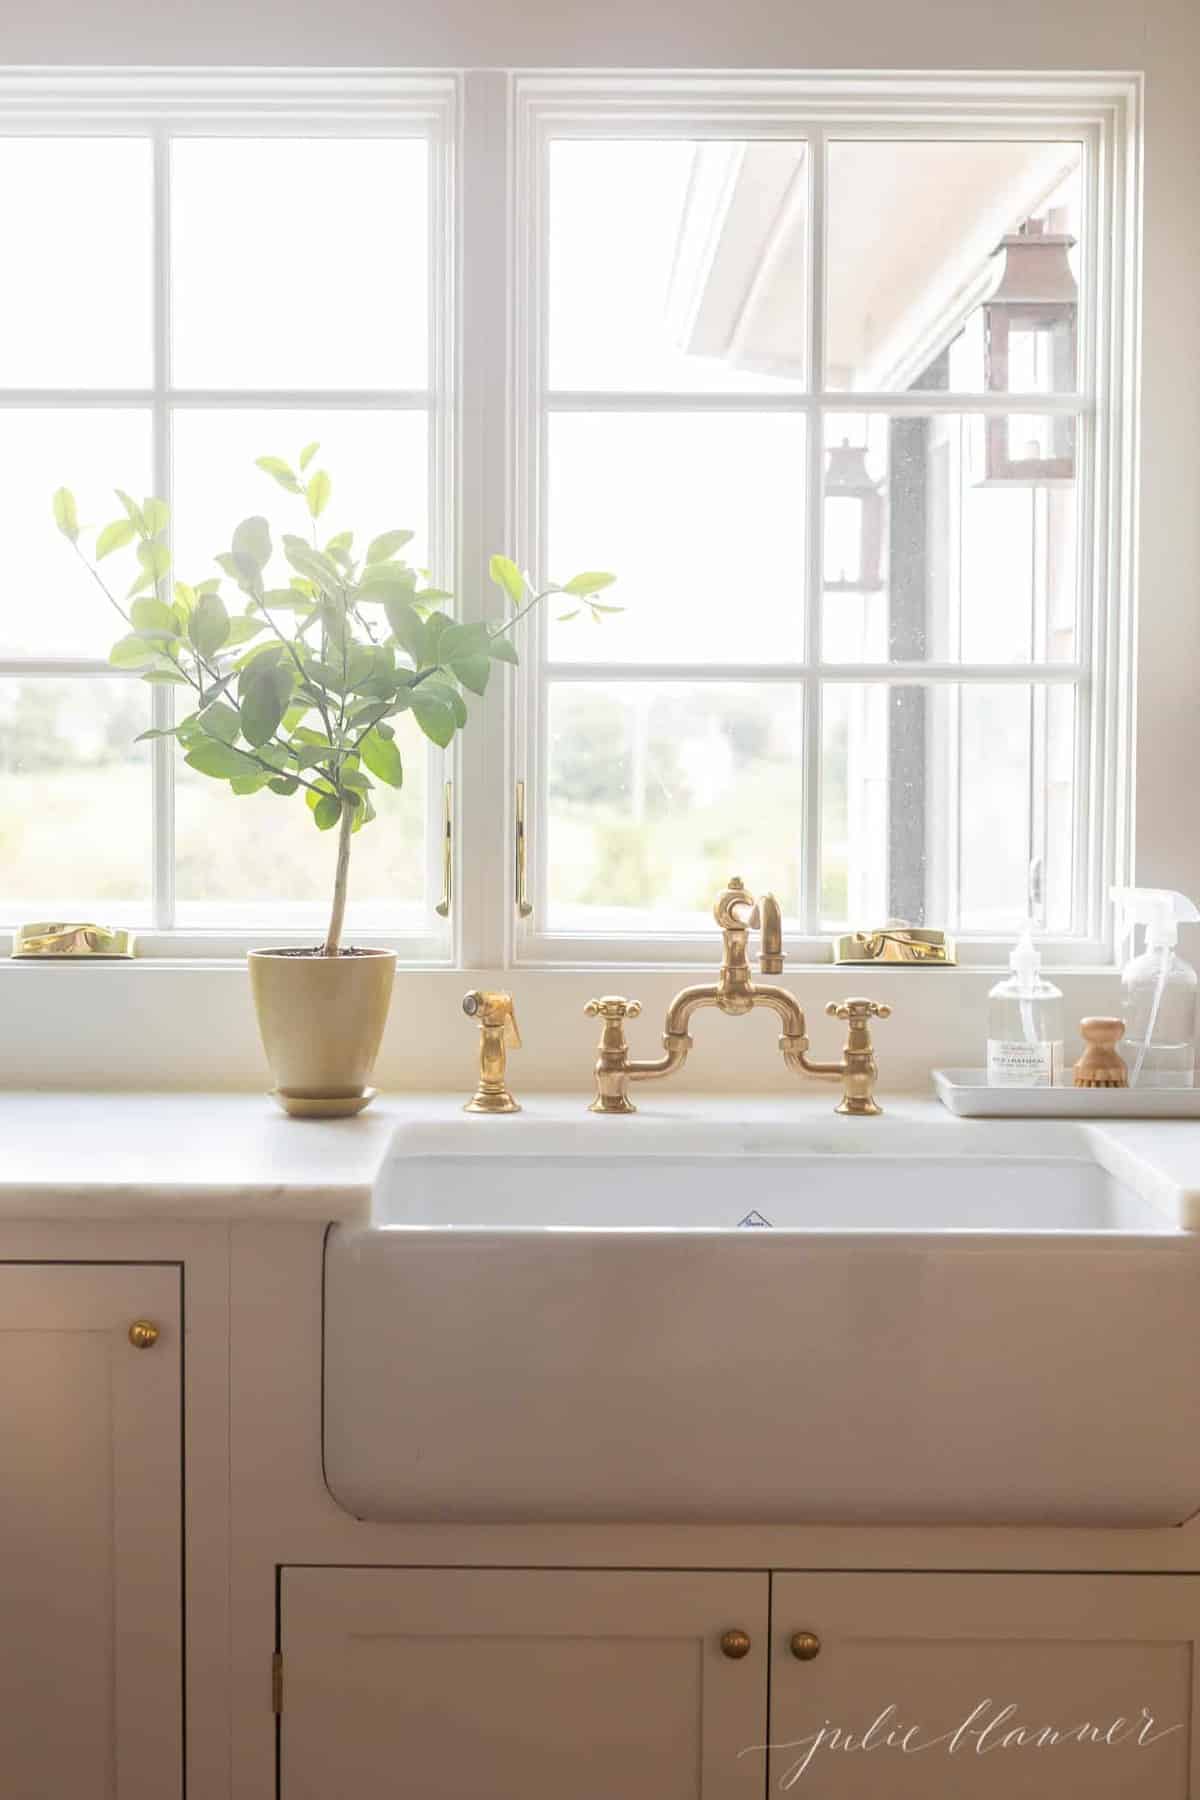 A white kitchen sink area, with a topiary style potted Meyer lemon tree.